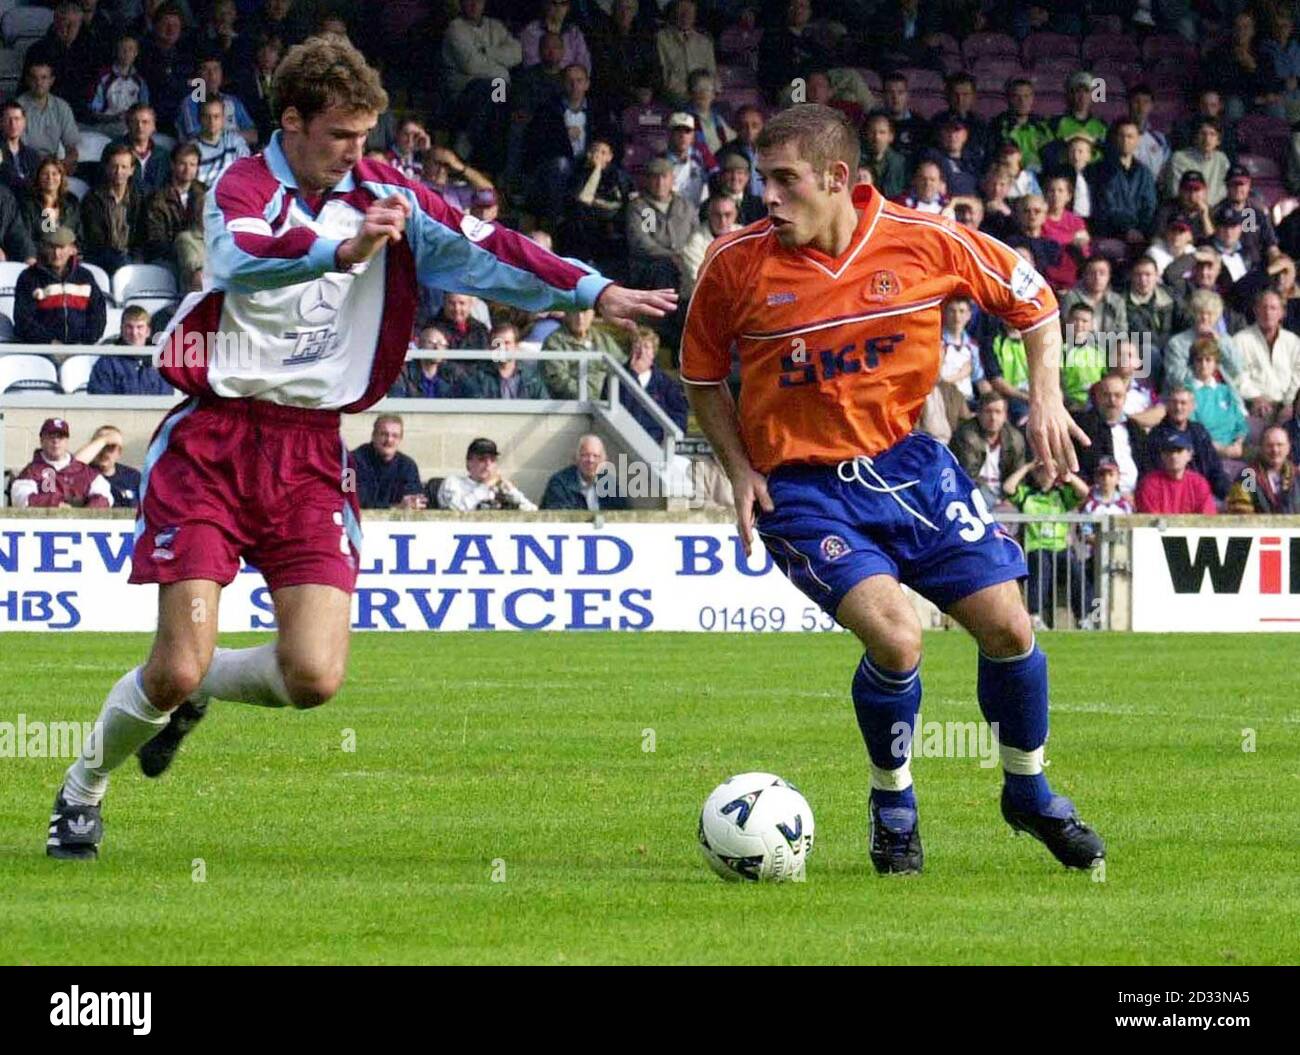 Scunthorpe's Richard Kell closes in on Luton Town's Dean Crowe (right) during the Nationwide Division Three match at Glanford Park, Scunthorpe. THIS PICTURE CAN ONLY BE USED WITHIN THE CONTEXT OF AN EDITORIAL FEATURE. NO UNOFFICIAL CLUB WEBSITE USE. Stock Photo